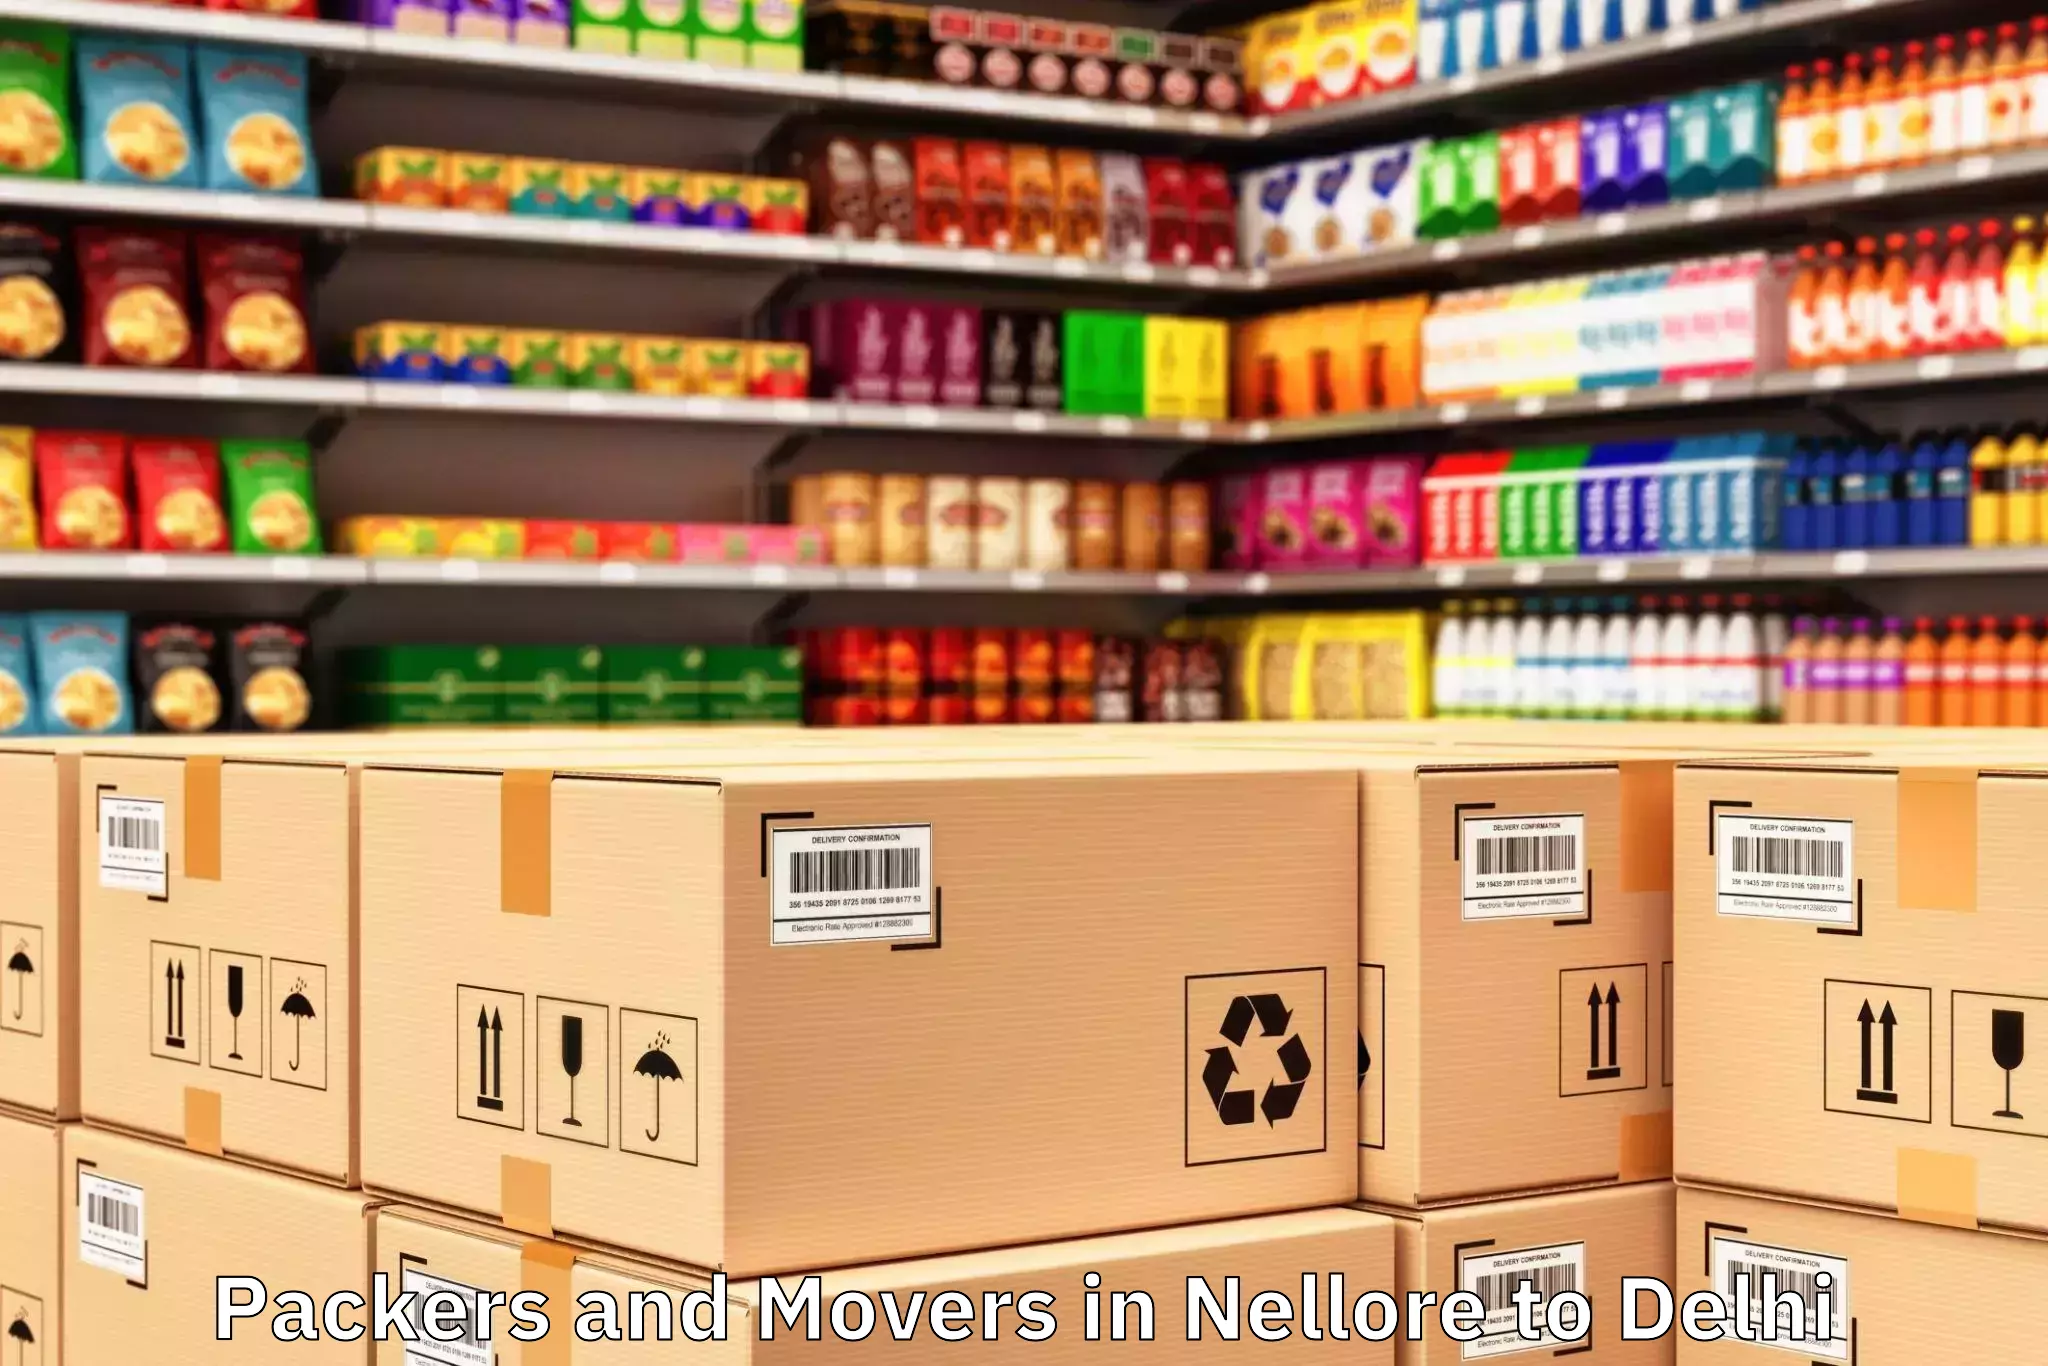 Top Nellore to Delhi Packers And Movers Available